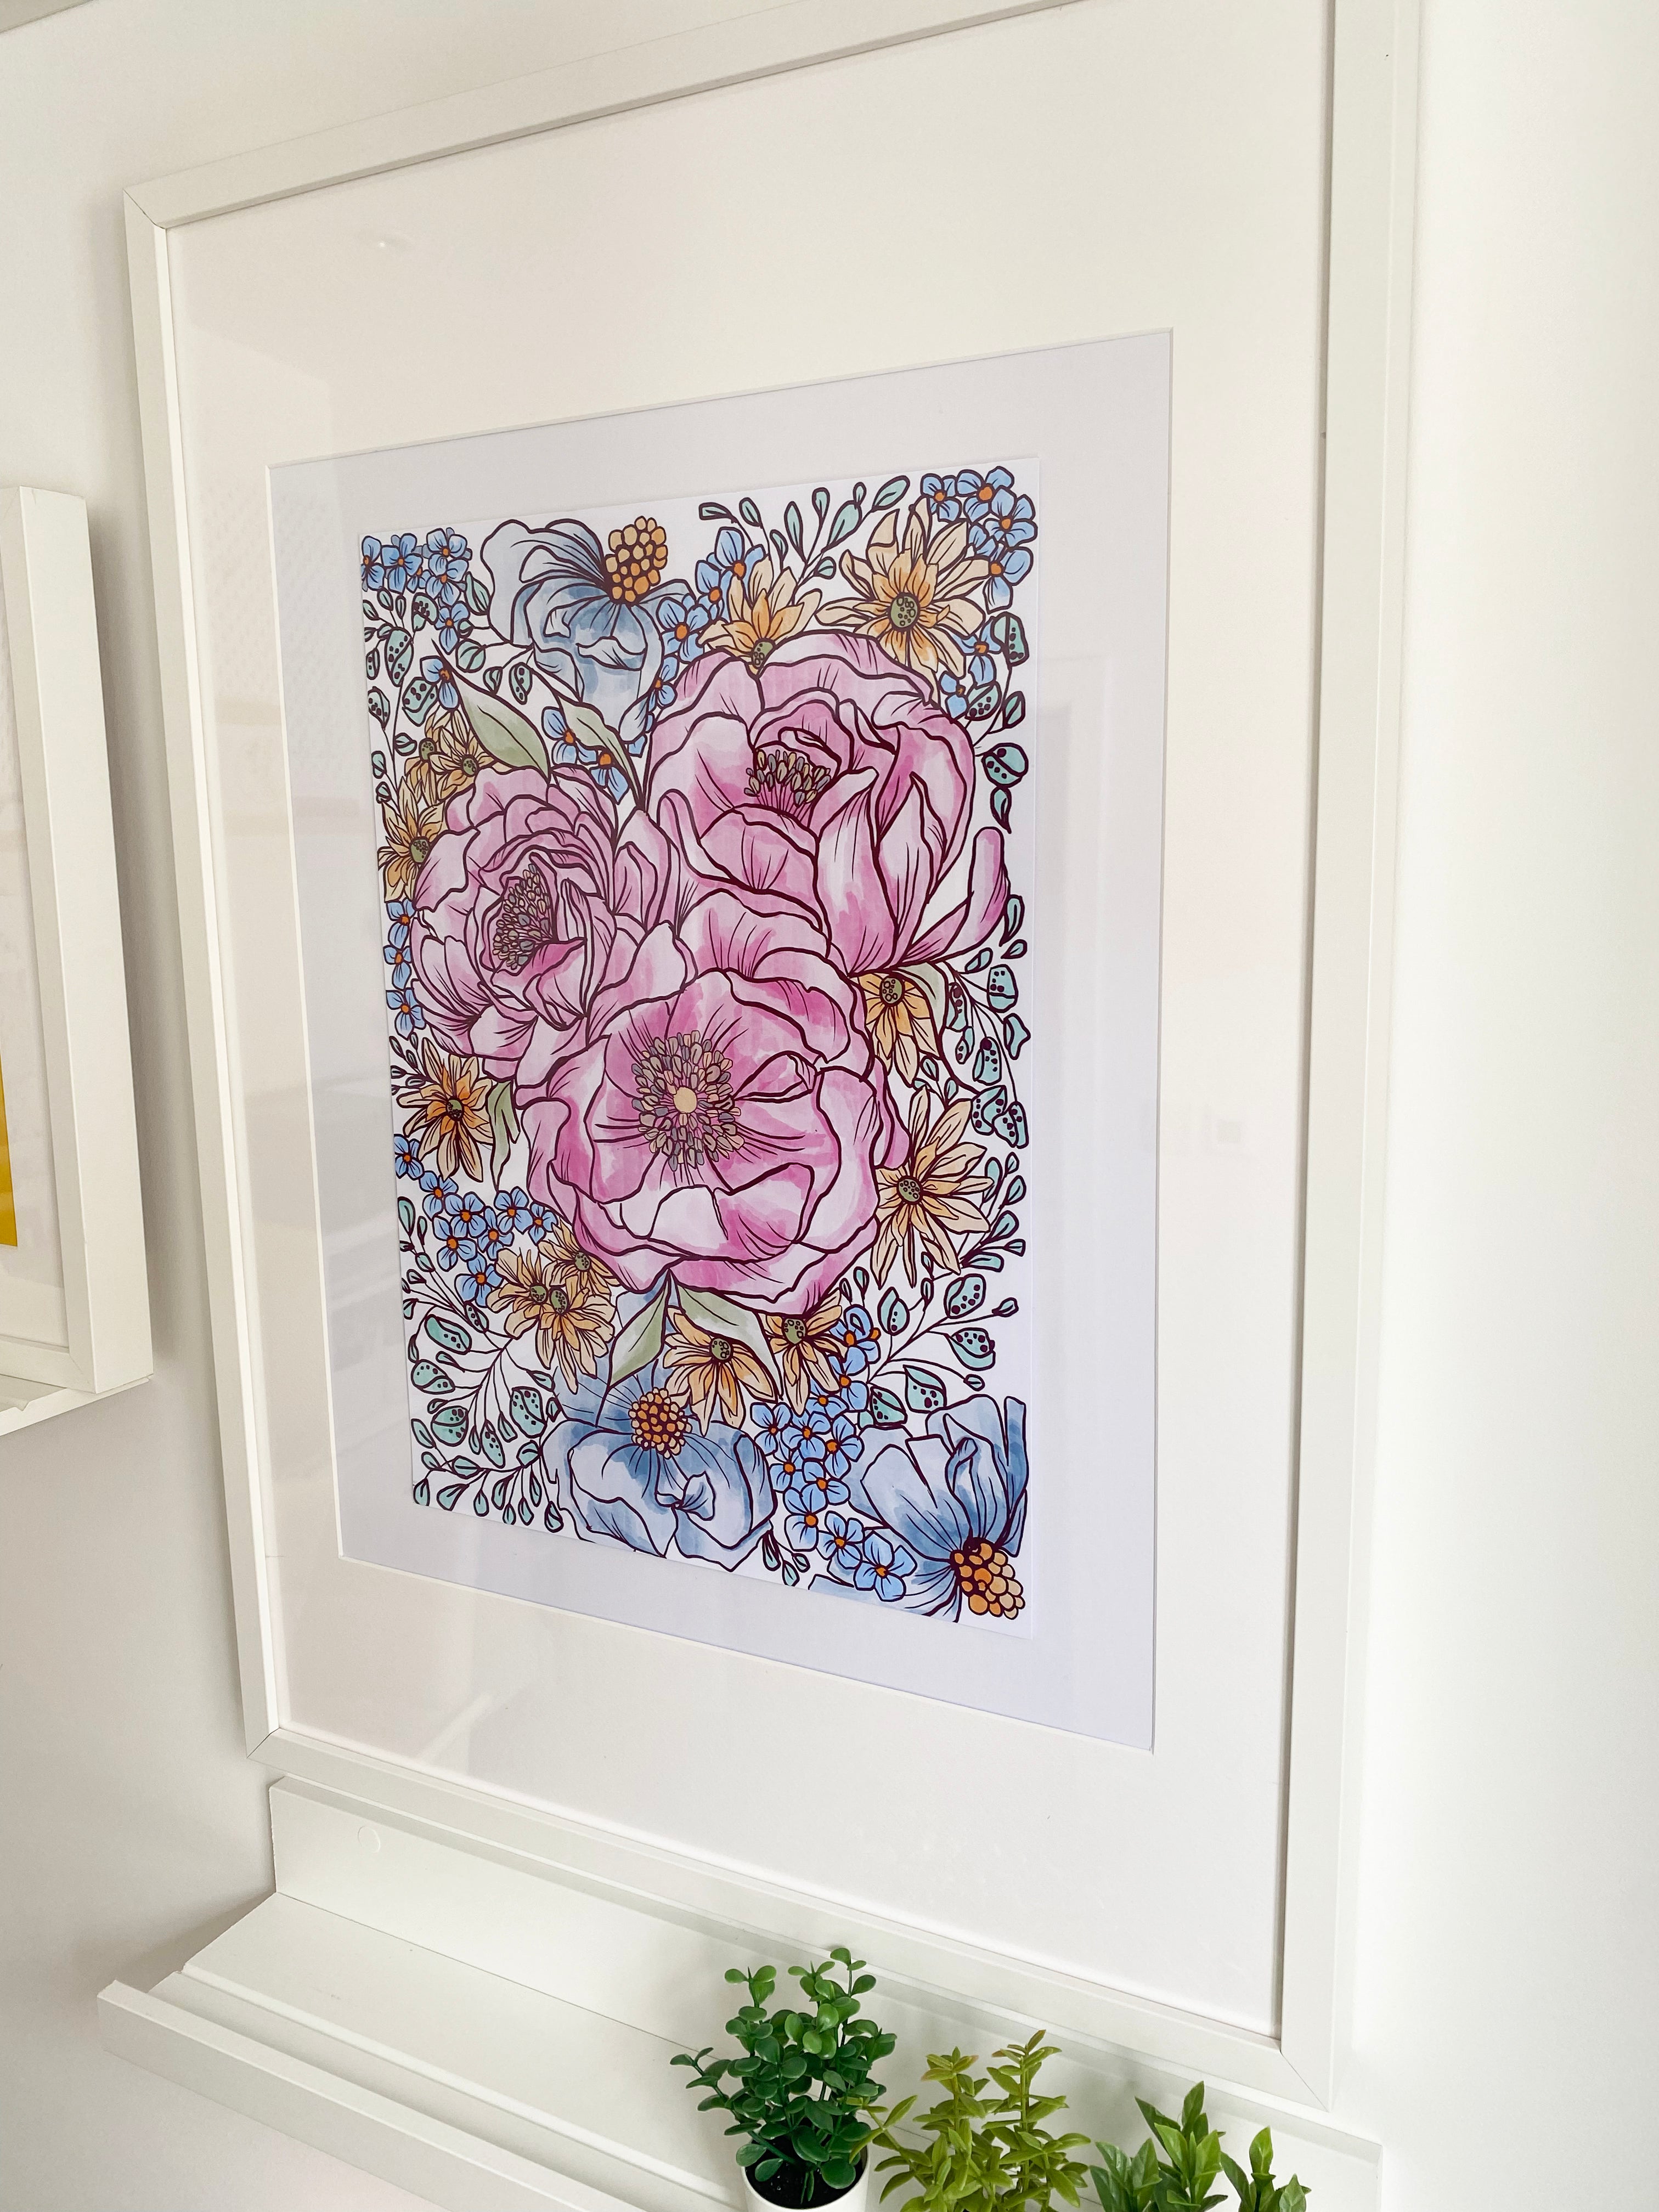 Full Bloom -  illustrated by hand flowers print